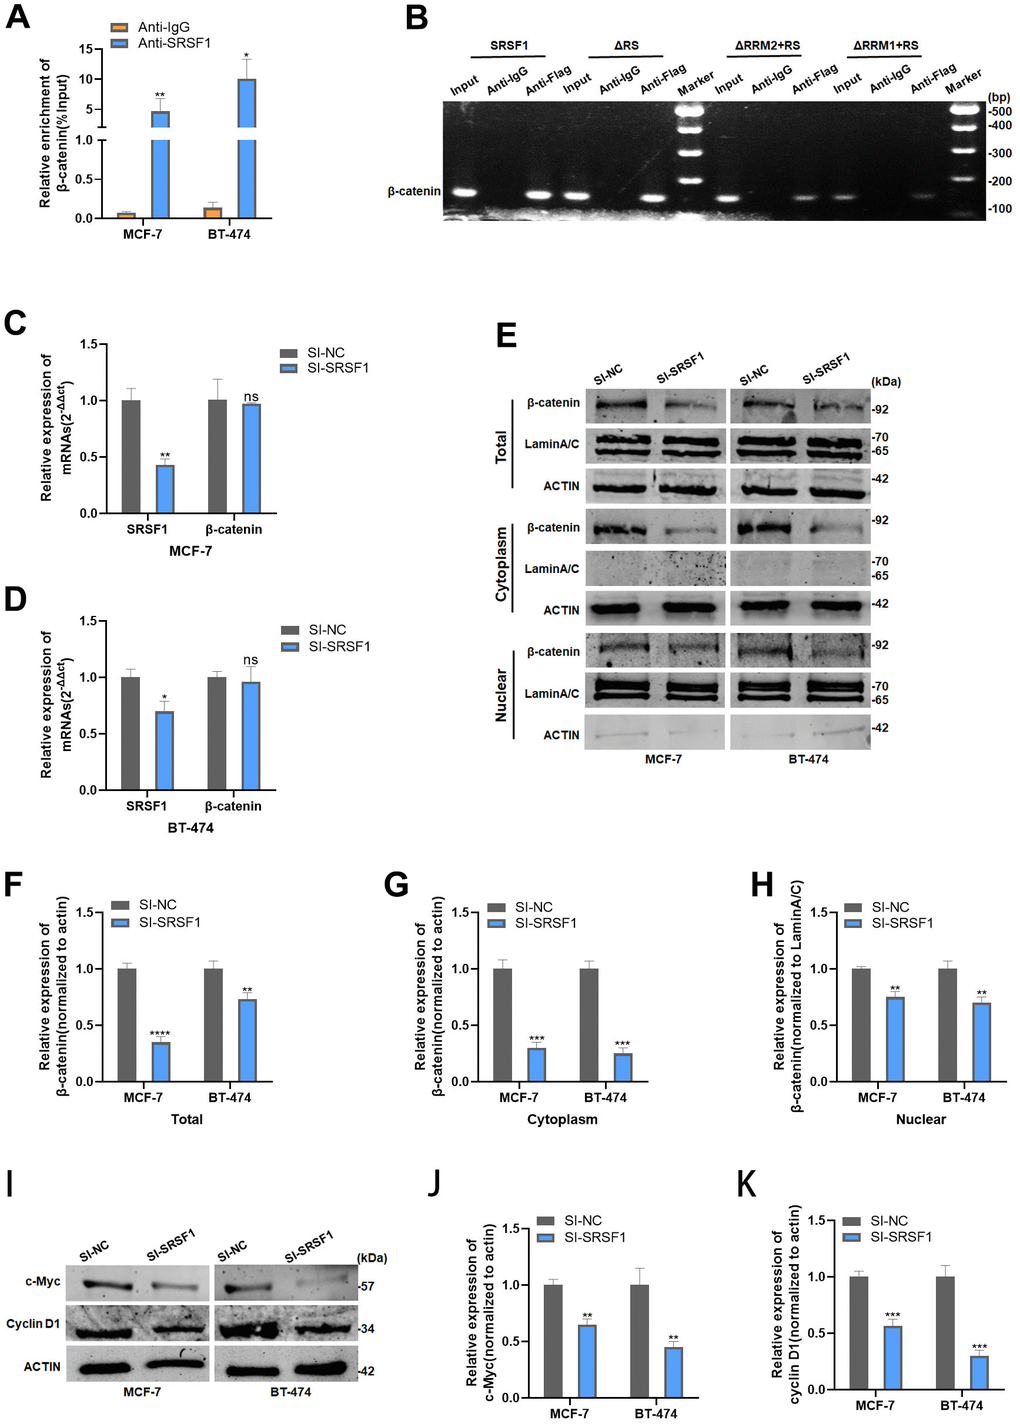 SRSF1 promoted Wnt signaling via upregulating β-catenin expression. (A) Anti-SRSF1 RIP assay was applied to validate the binding of SRSF1 to β-catenin mRNA. (B) Anti-Flag RIP assay was applied to validate the binding of SRSF1 to β-catenin mRNA. (C, D) mRNA level of β-catenin in MCF-7 and BT-474 cell line transfected with SI-SRSF1. (E–H) Protein level of β-catenin in MCF-7 and BT-474 cell line transfected with SI-SRSF1. (I–K) Protein level of c-Myc and cyclin D1 in MCF-7 and BT-474 cell line transfected with SI-SRSF1. *p0.05.